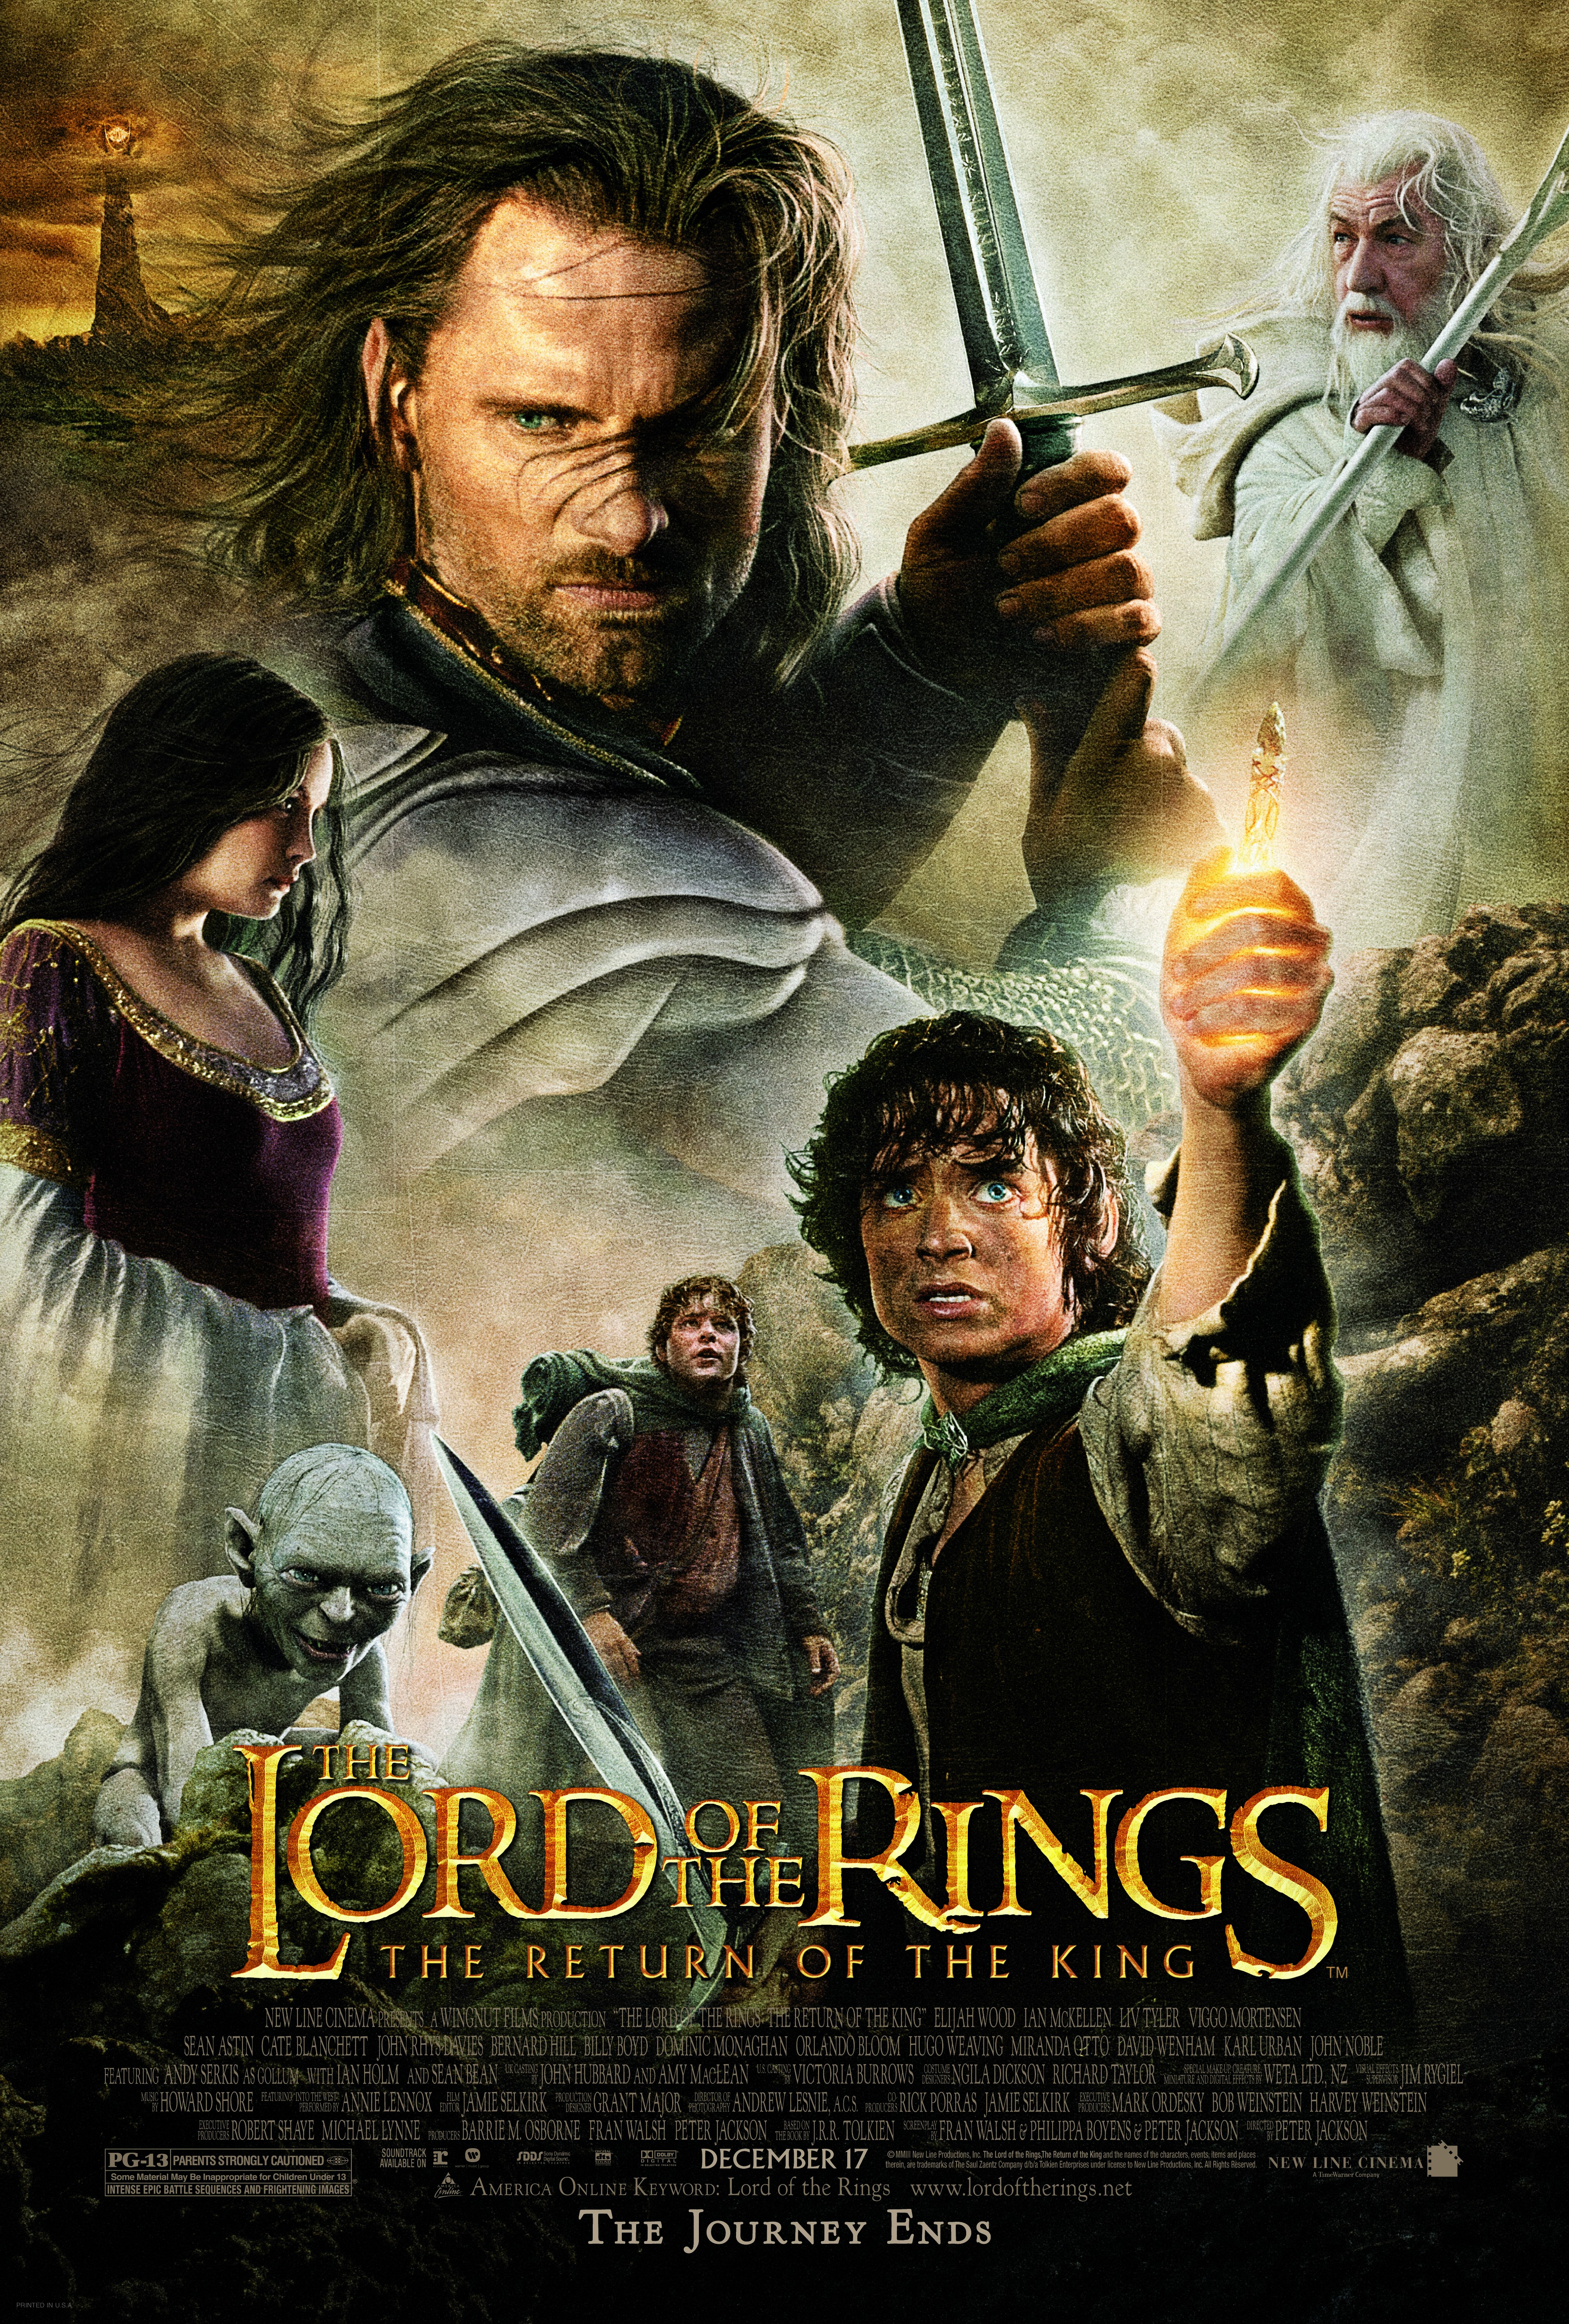 The Lord of the Rings, movie posters, posters, The Return of the King - desktop wallpaper